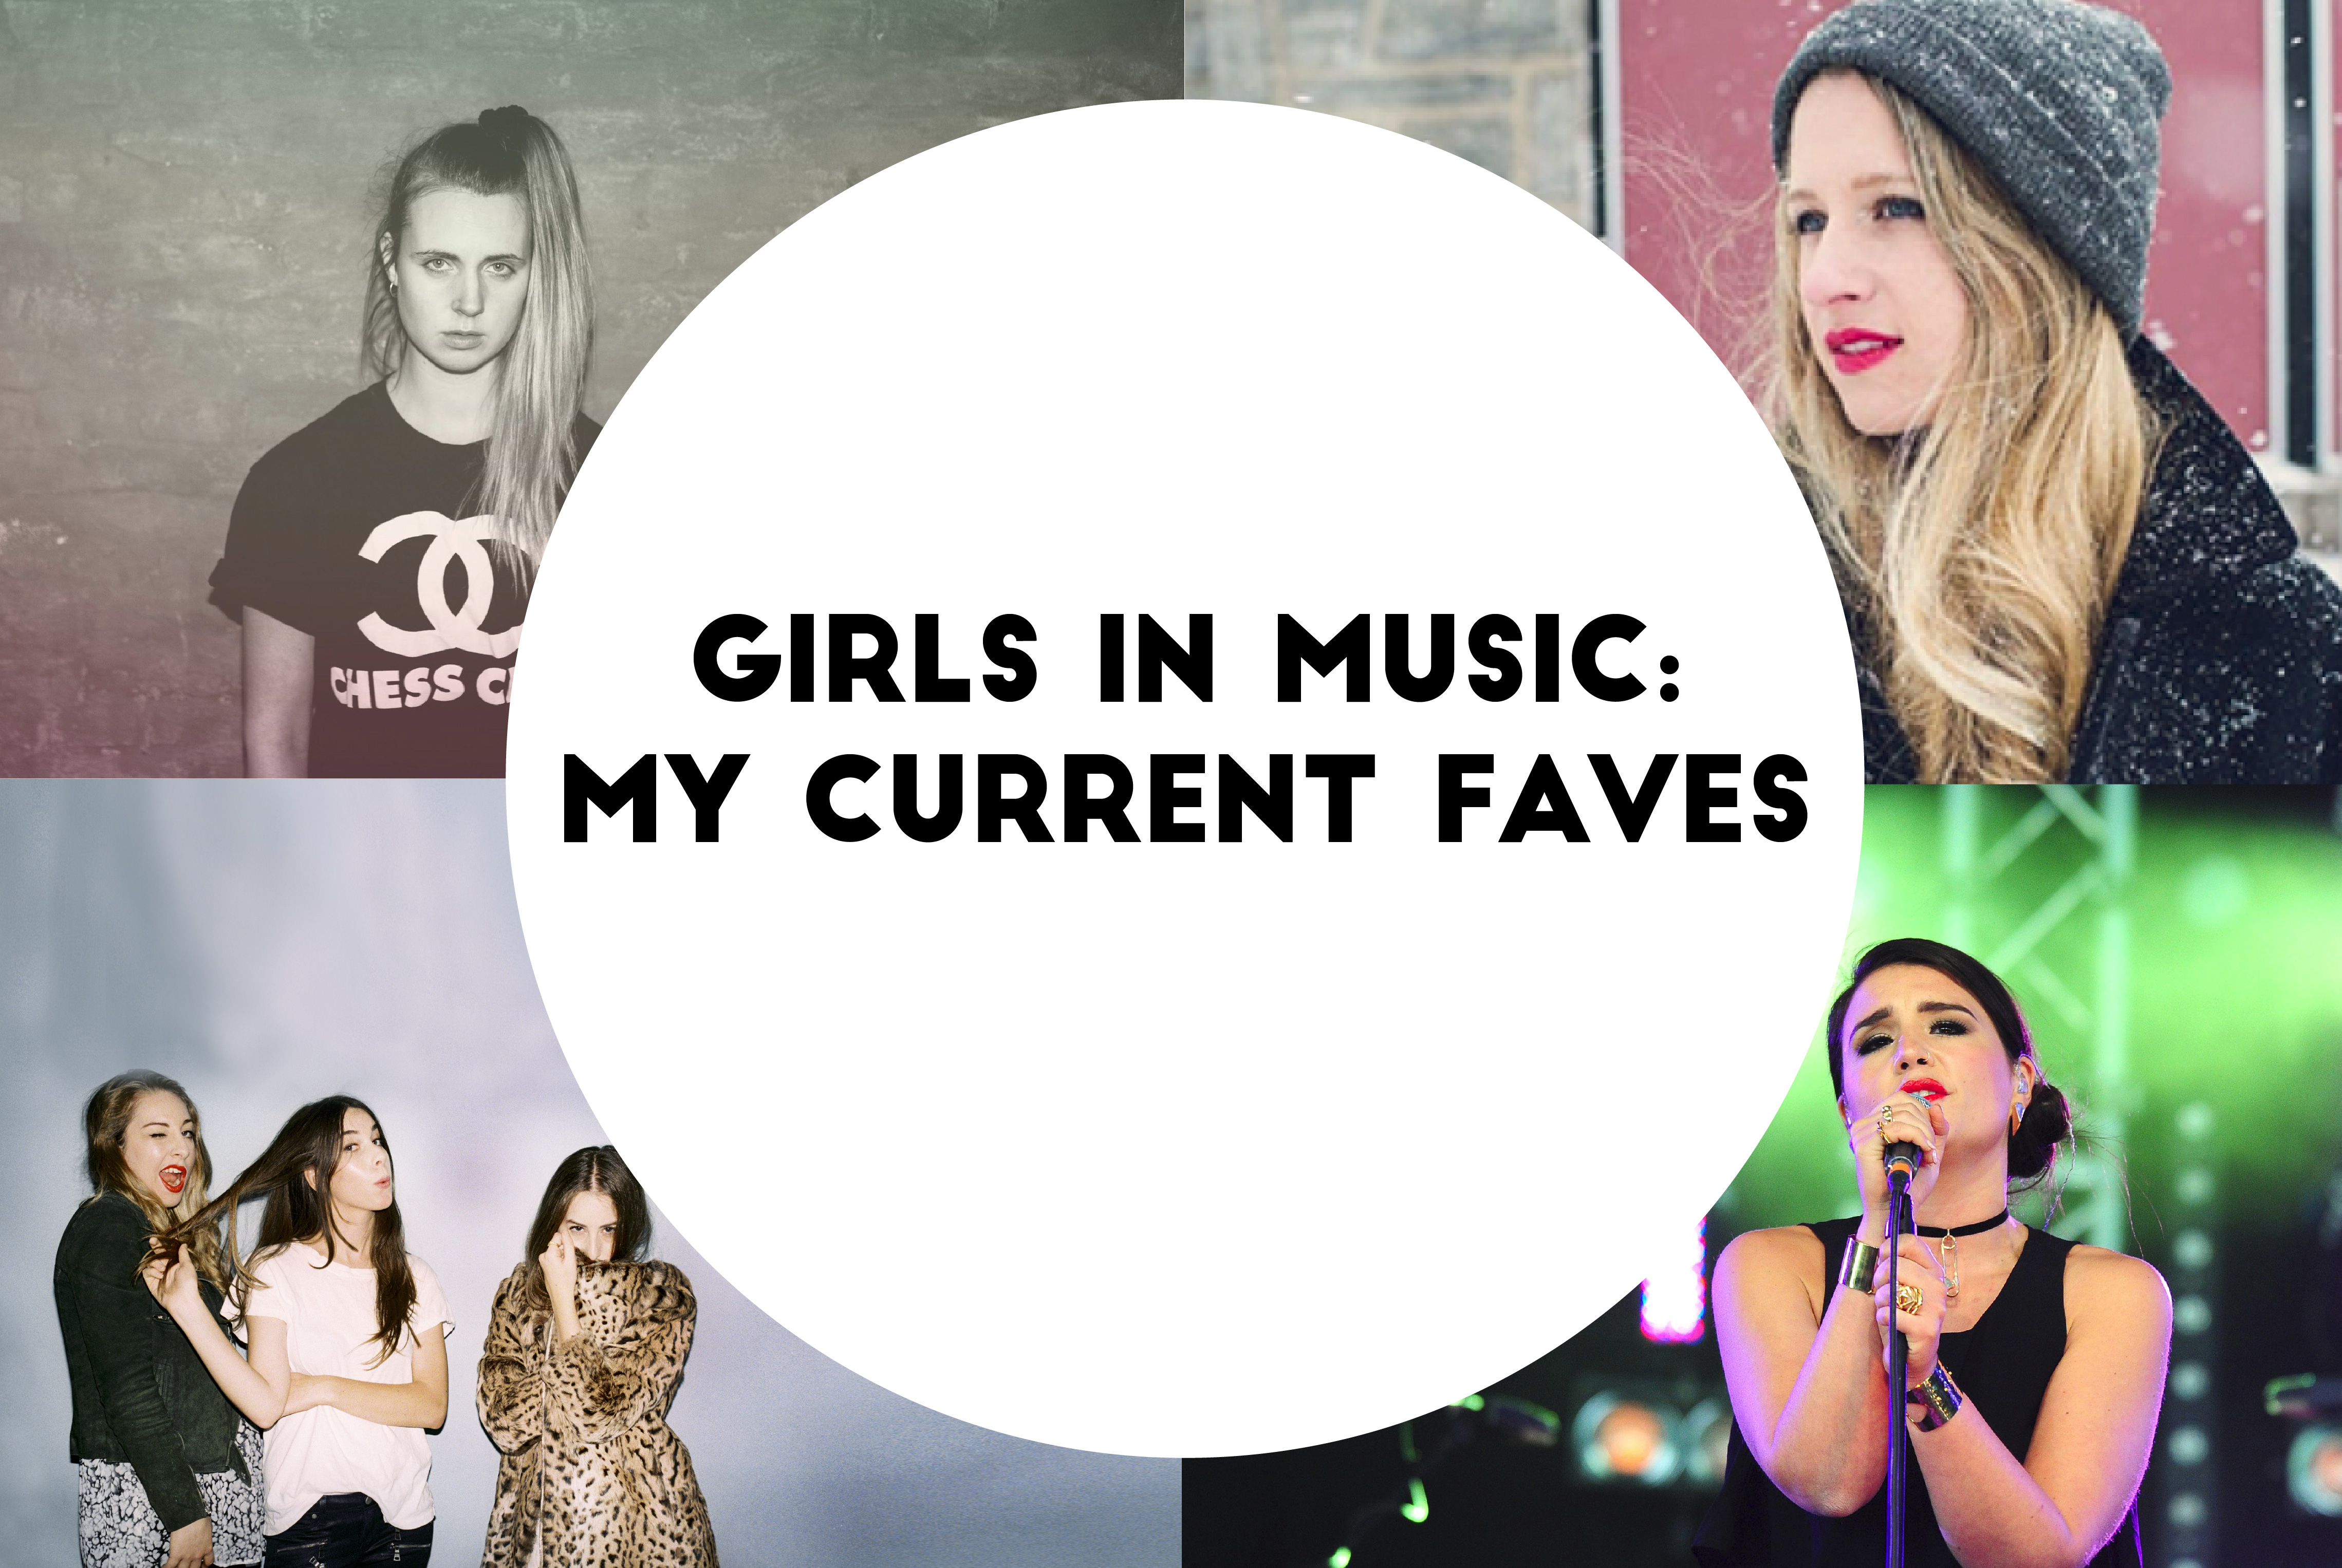 Girls in Music: My Current Faves